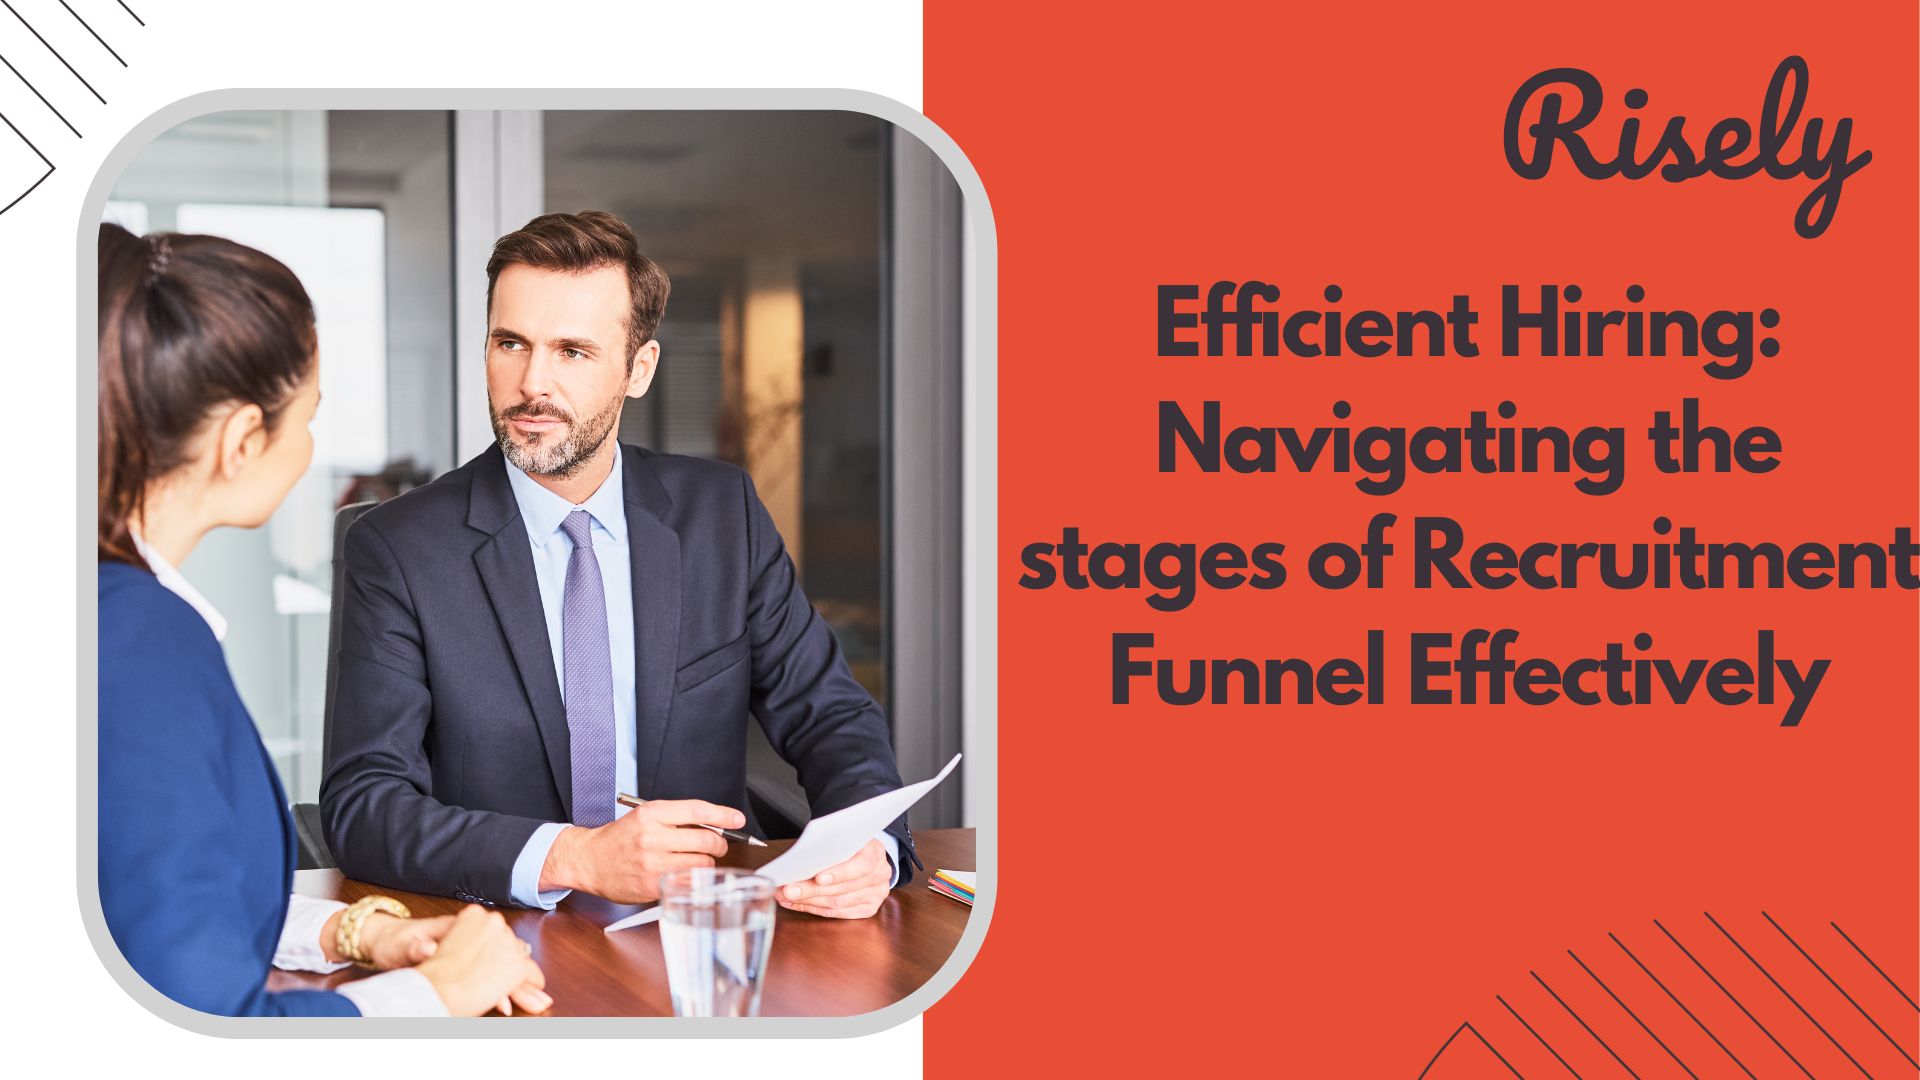 Efficient Hiring: Navigating the stages of Recruitment Funnel Effectively